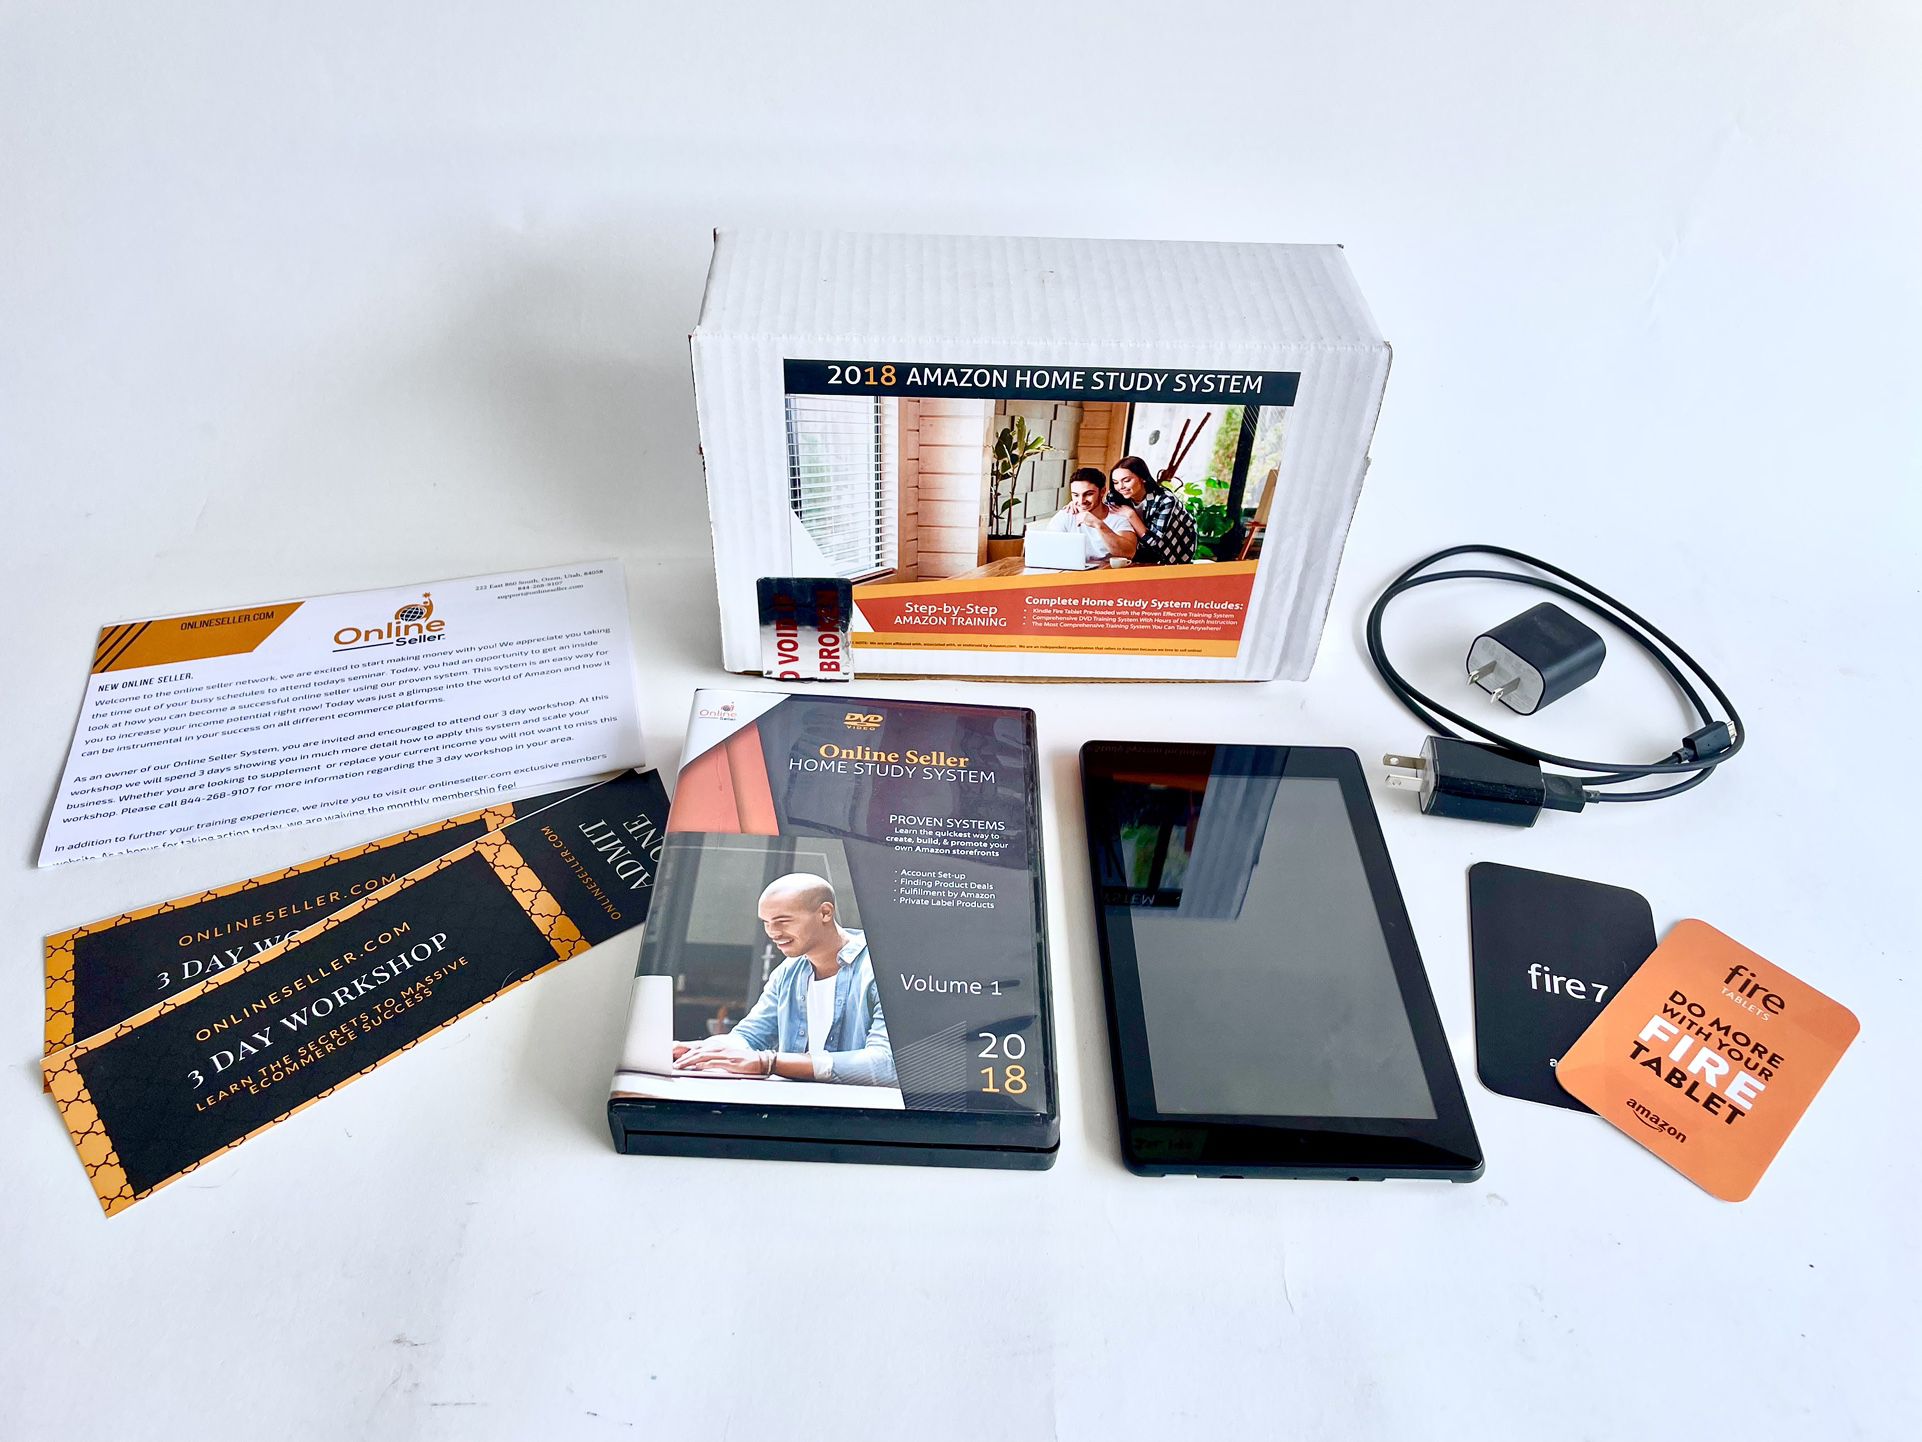 Amazon Home Study System With Kindle Fire Tablet & 8 DVD’s